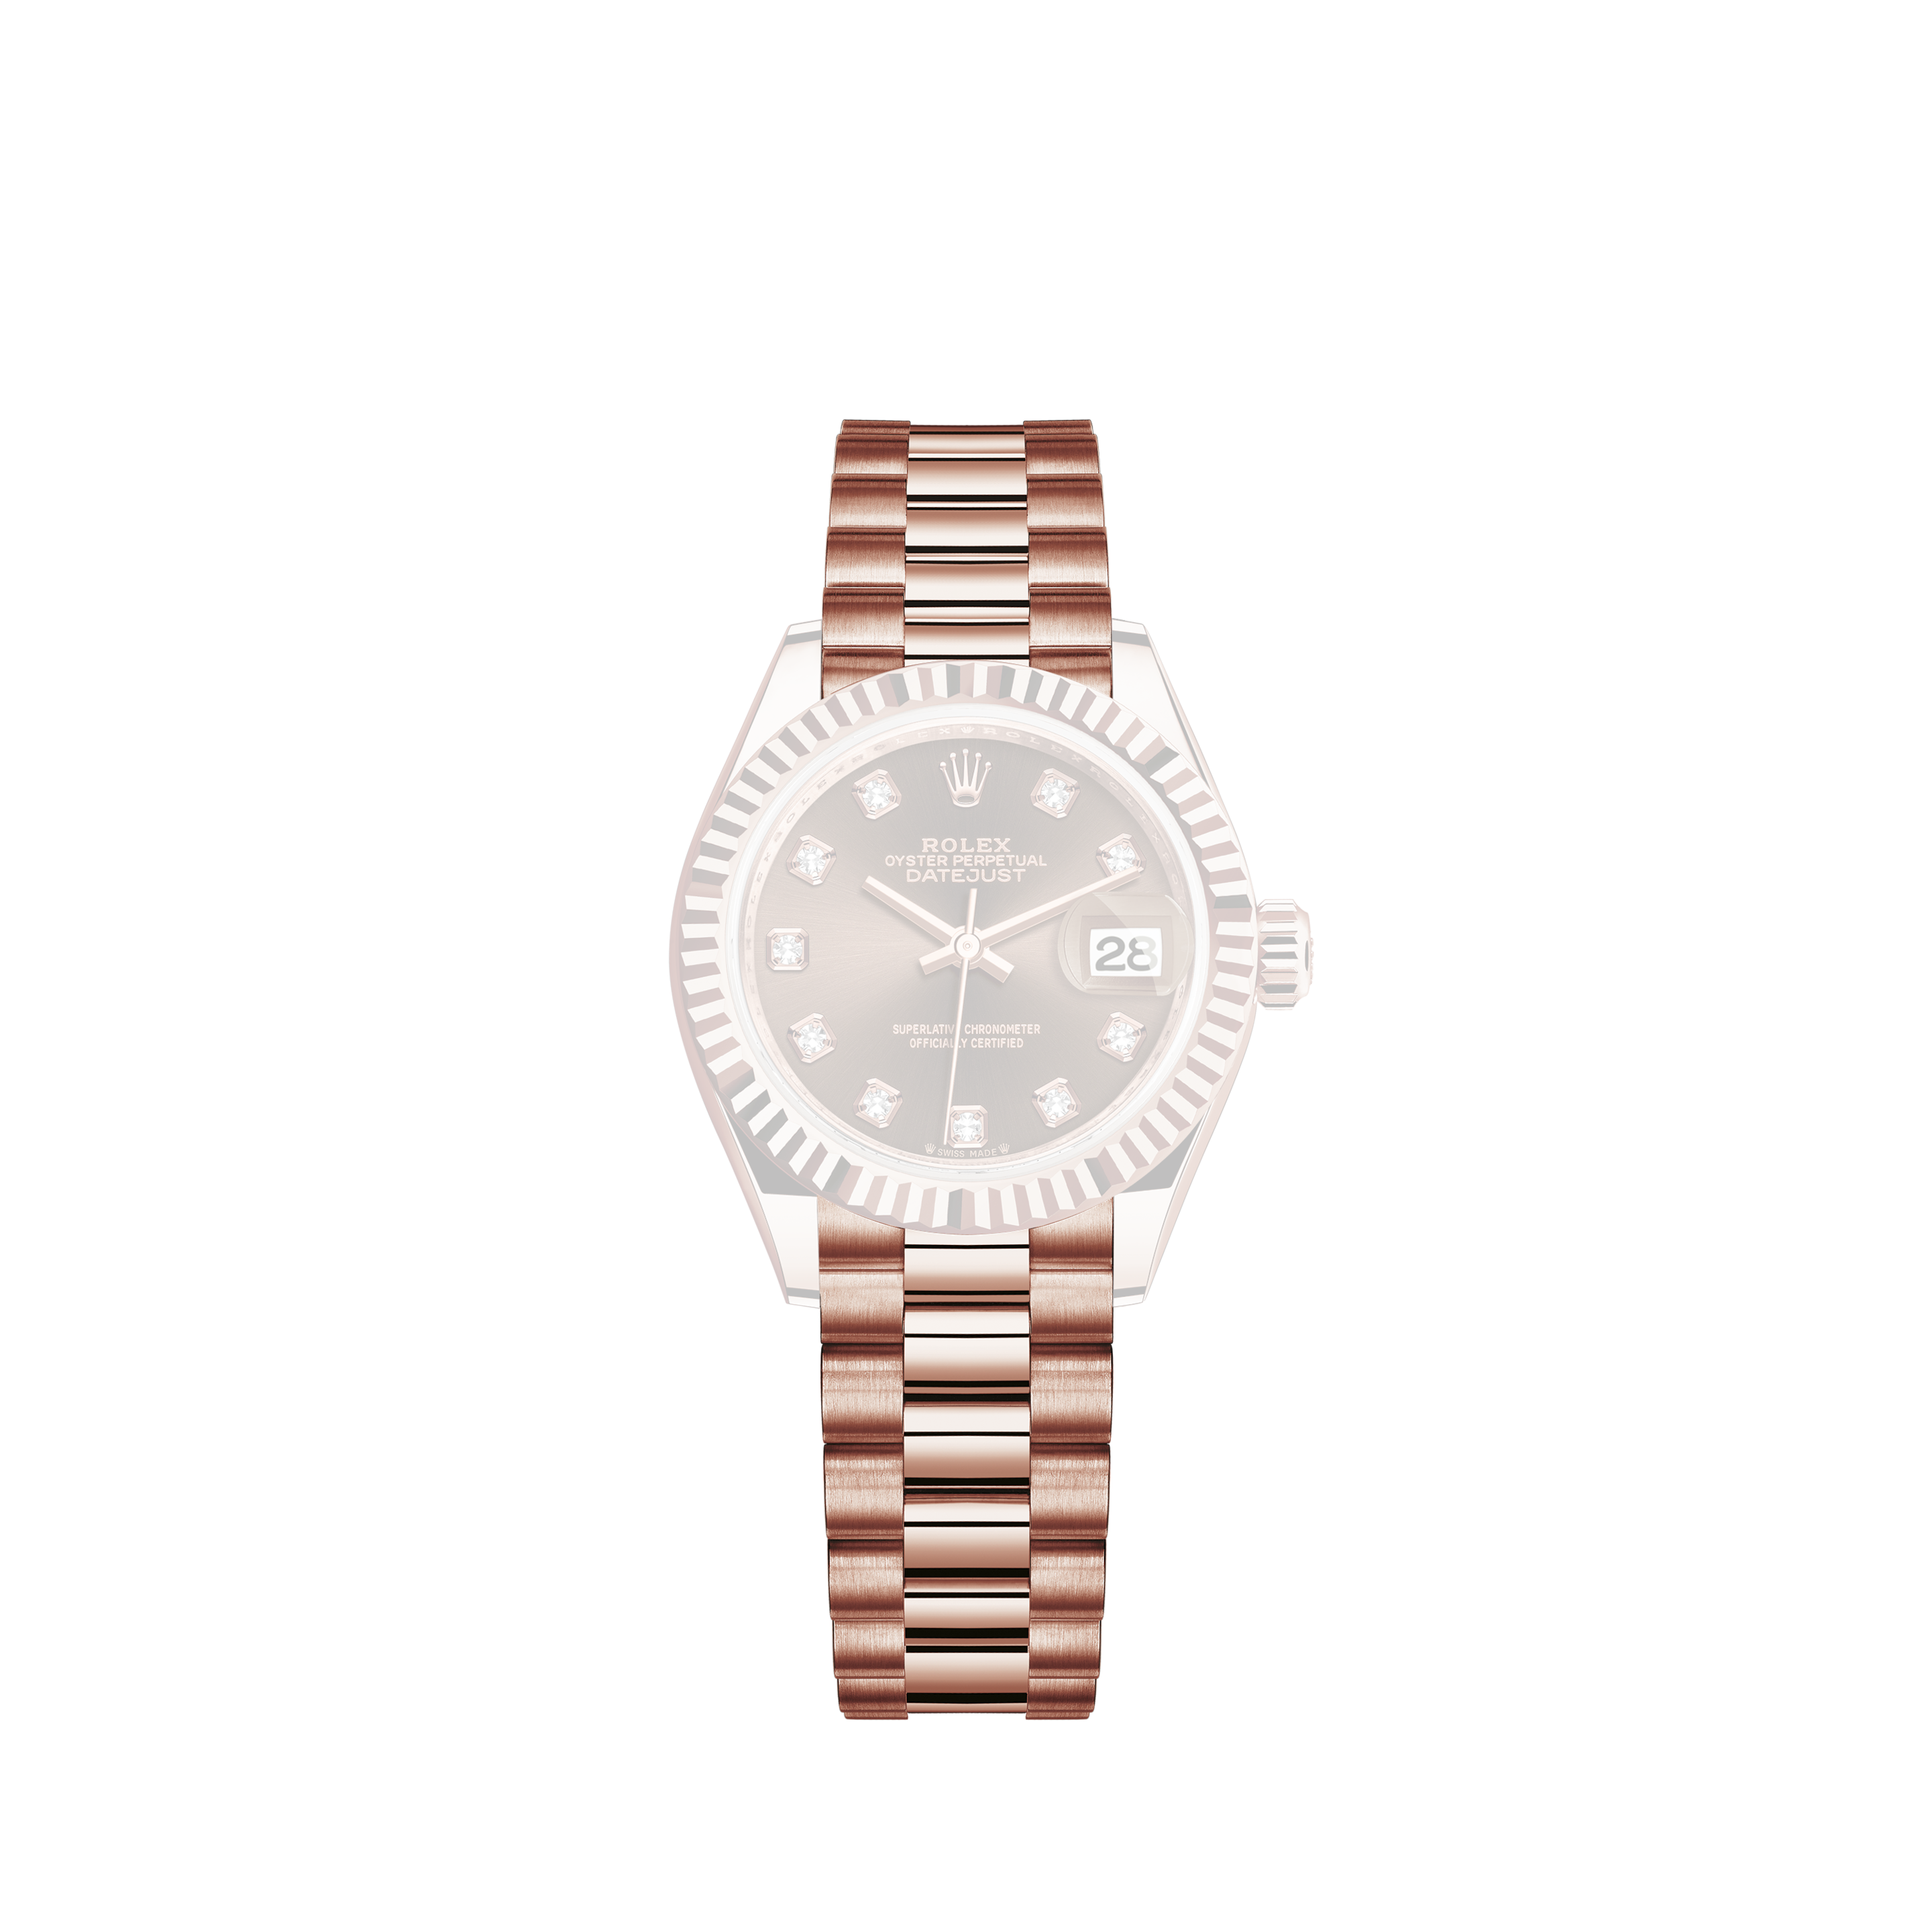 Rolex Datejust 36 Automatic Blue Computer Dial White Gold Diamond Indexes Ladies Watch - 116234Rolex Sky-Dweller Everose Gold White Dial